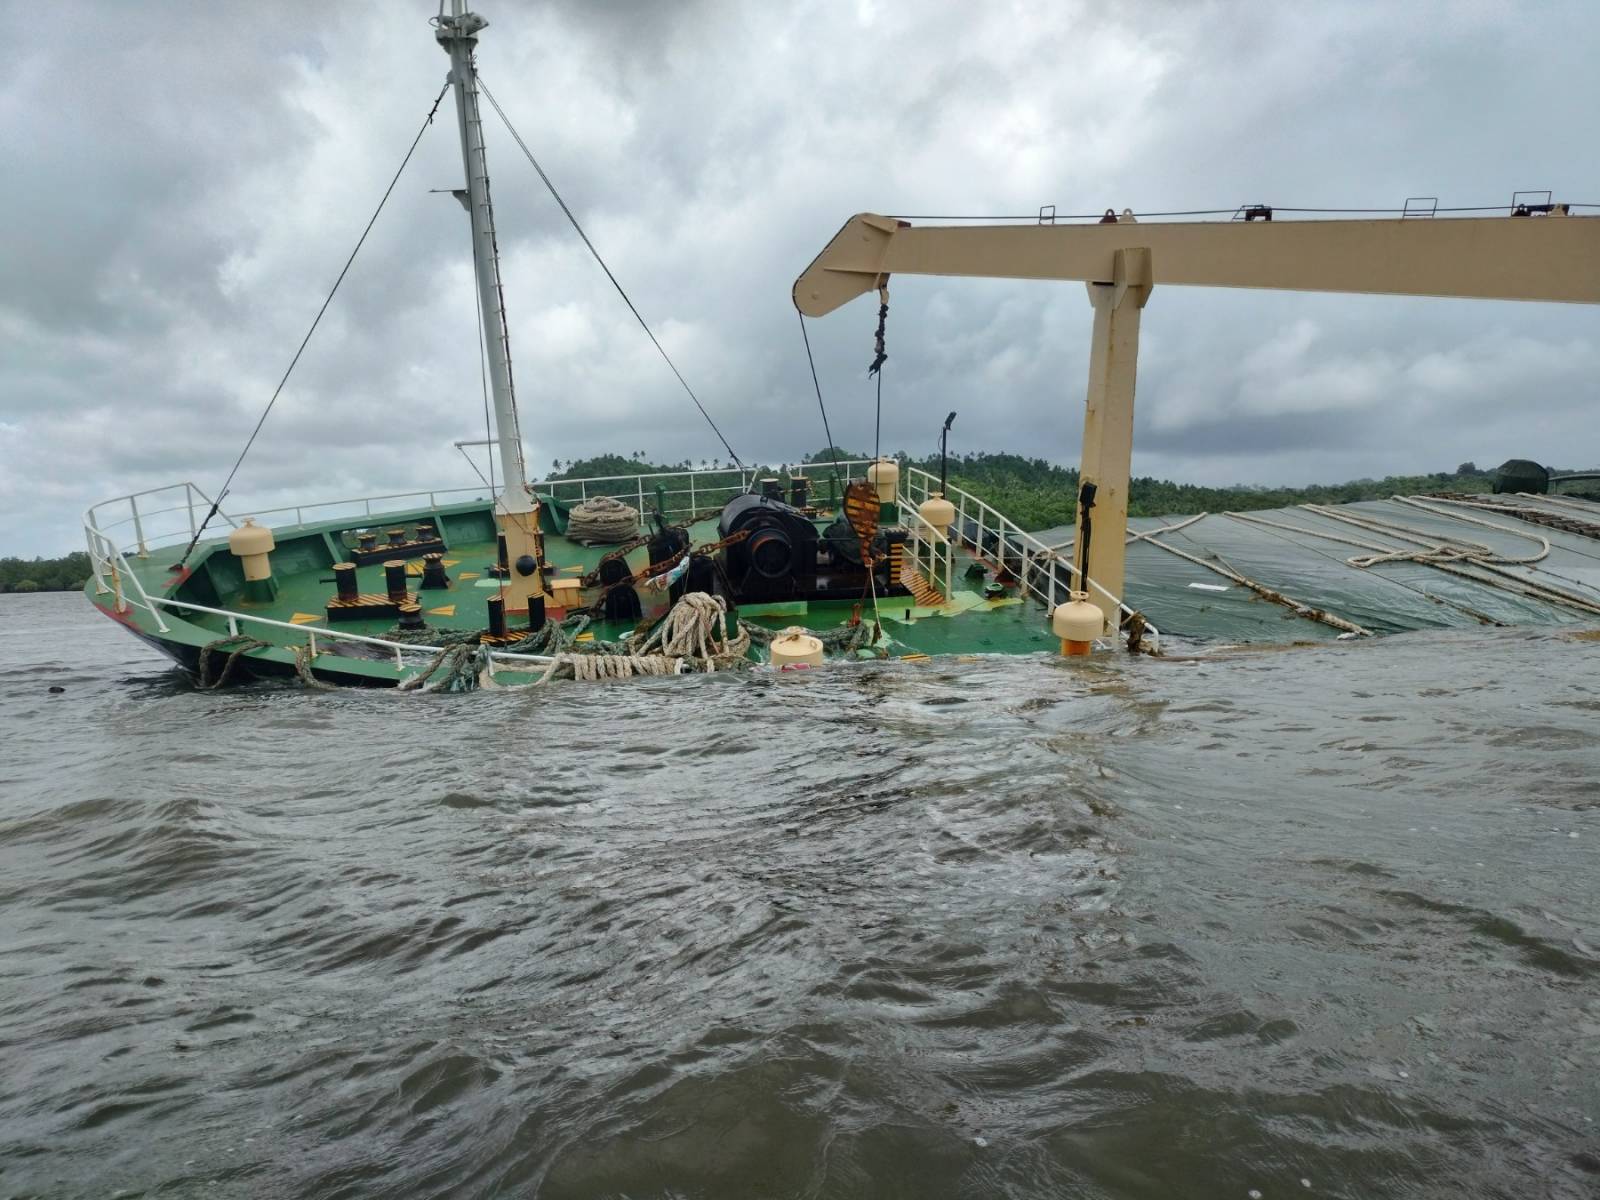 A cargo vessel from Vietnam ran aground in the waters off Balabac town in Palawan province on Tuesday night, the Balabac Municipal Disaster Risk and Reduction Management (MDRRM) Office said Wednesday, Nov. 22.